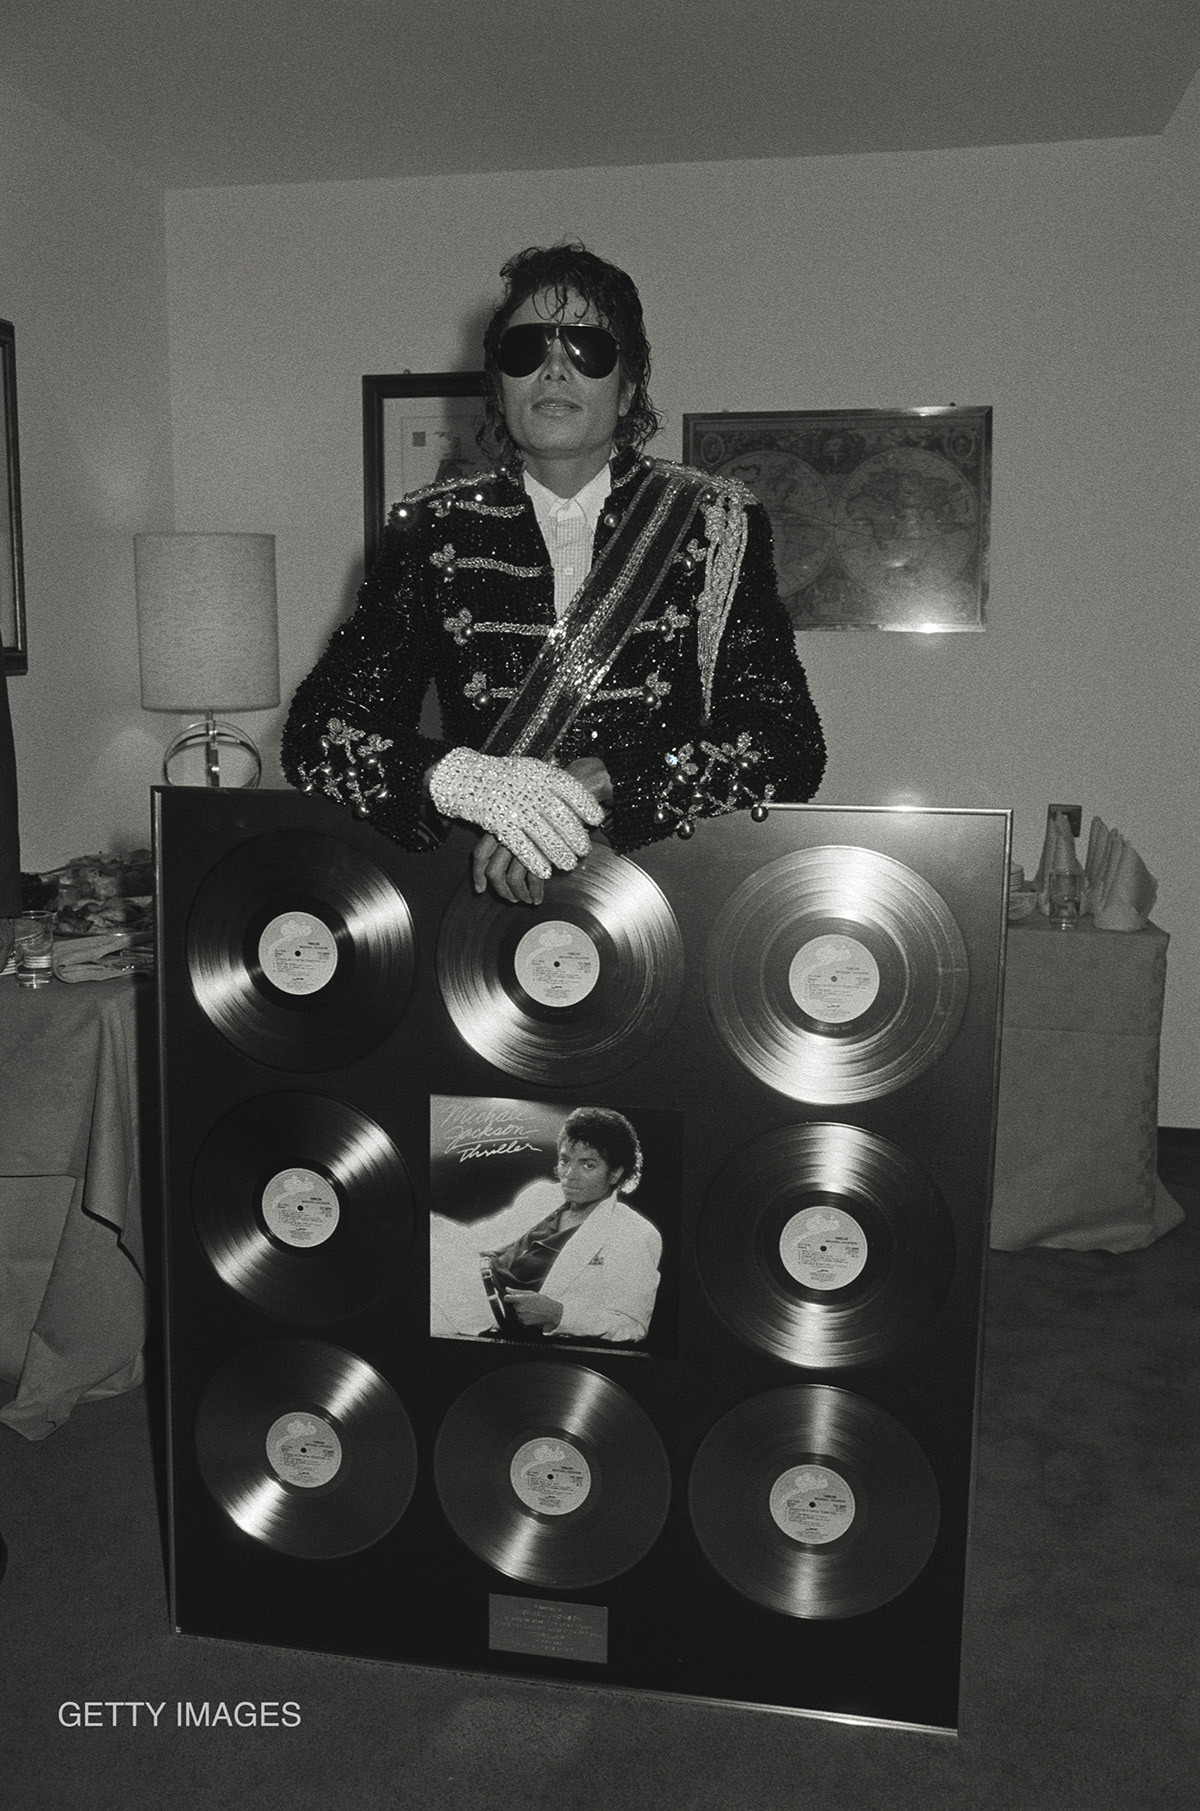 Michael Jackson with gold discs for his Thriller album in the 1980s.